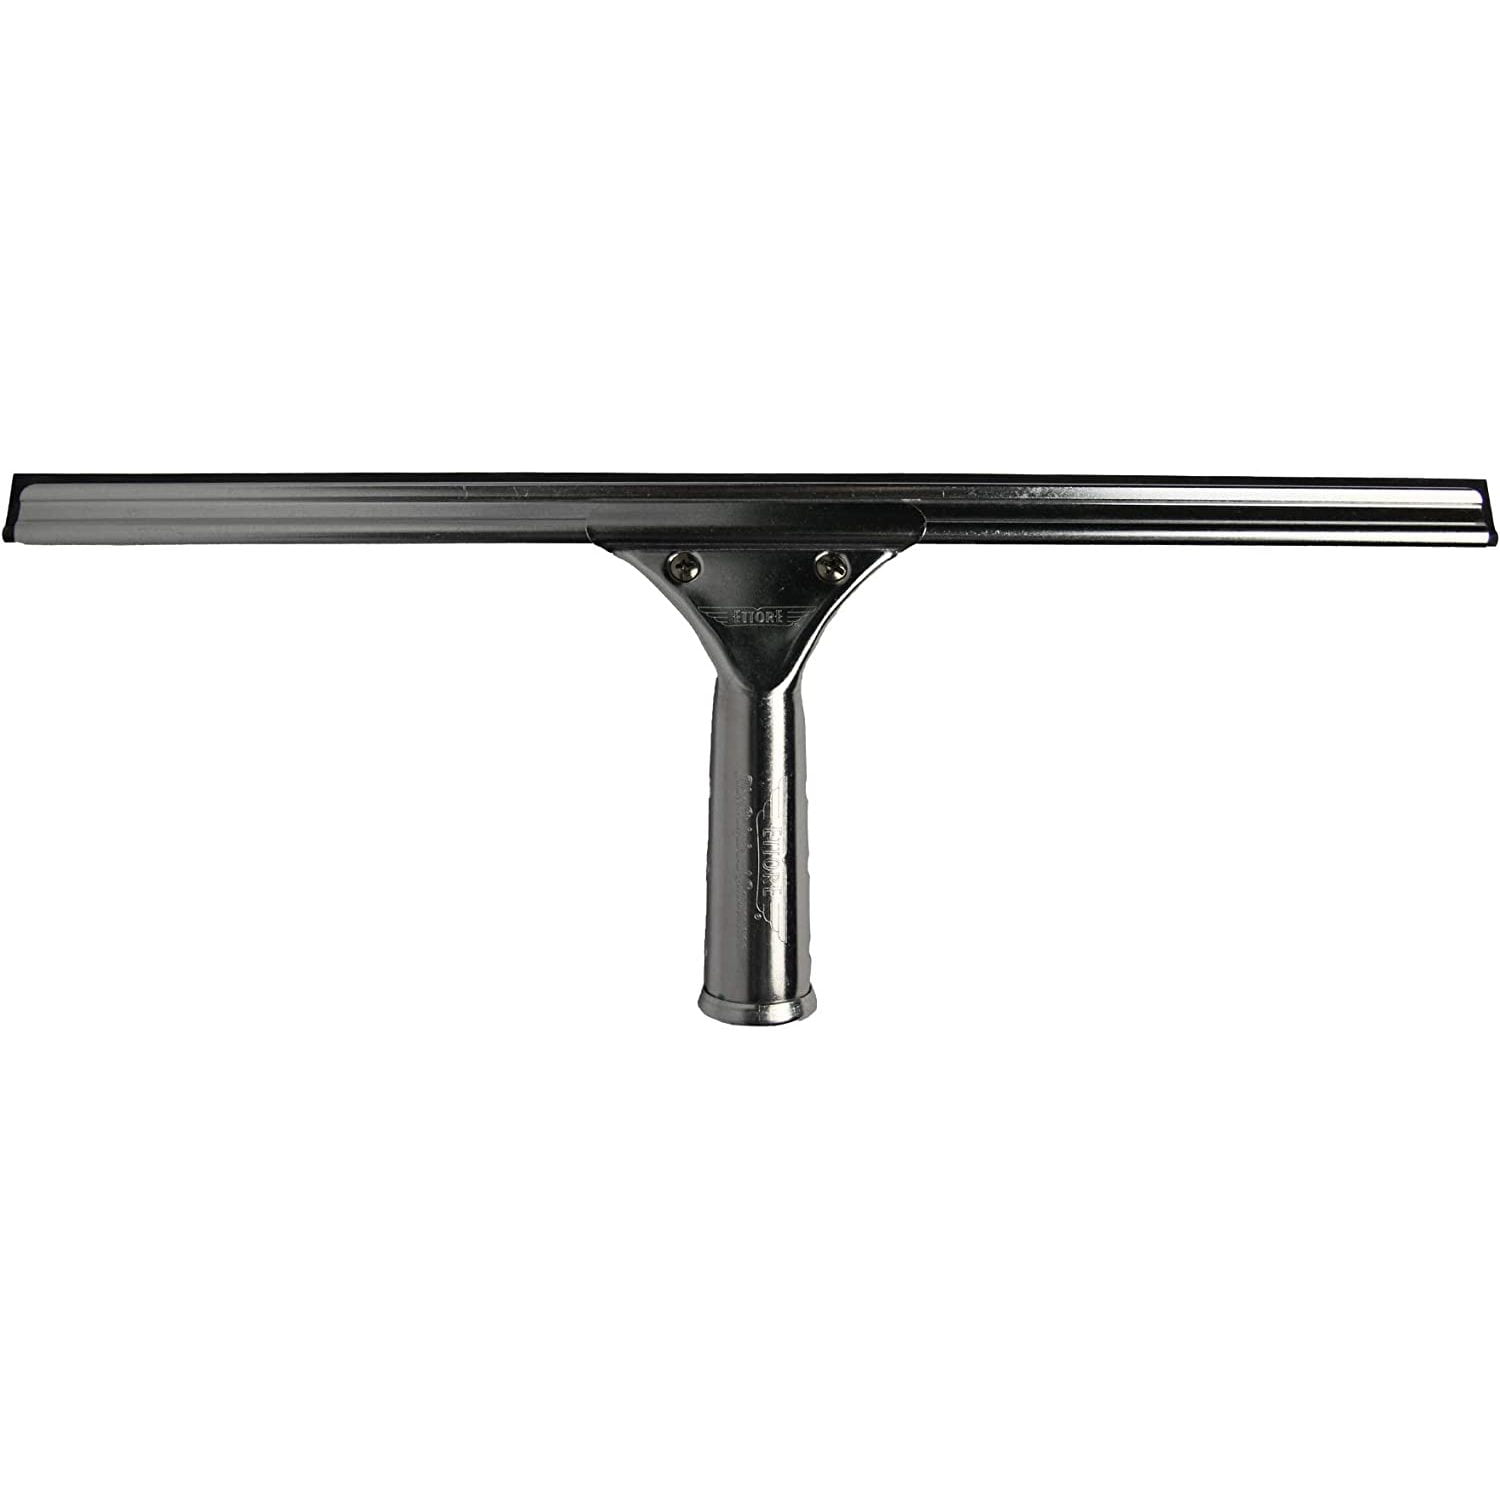 11116 16 in. Professional Stainless Steel Window Squeegee, 1 - City Market